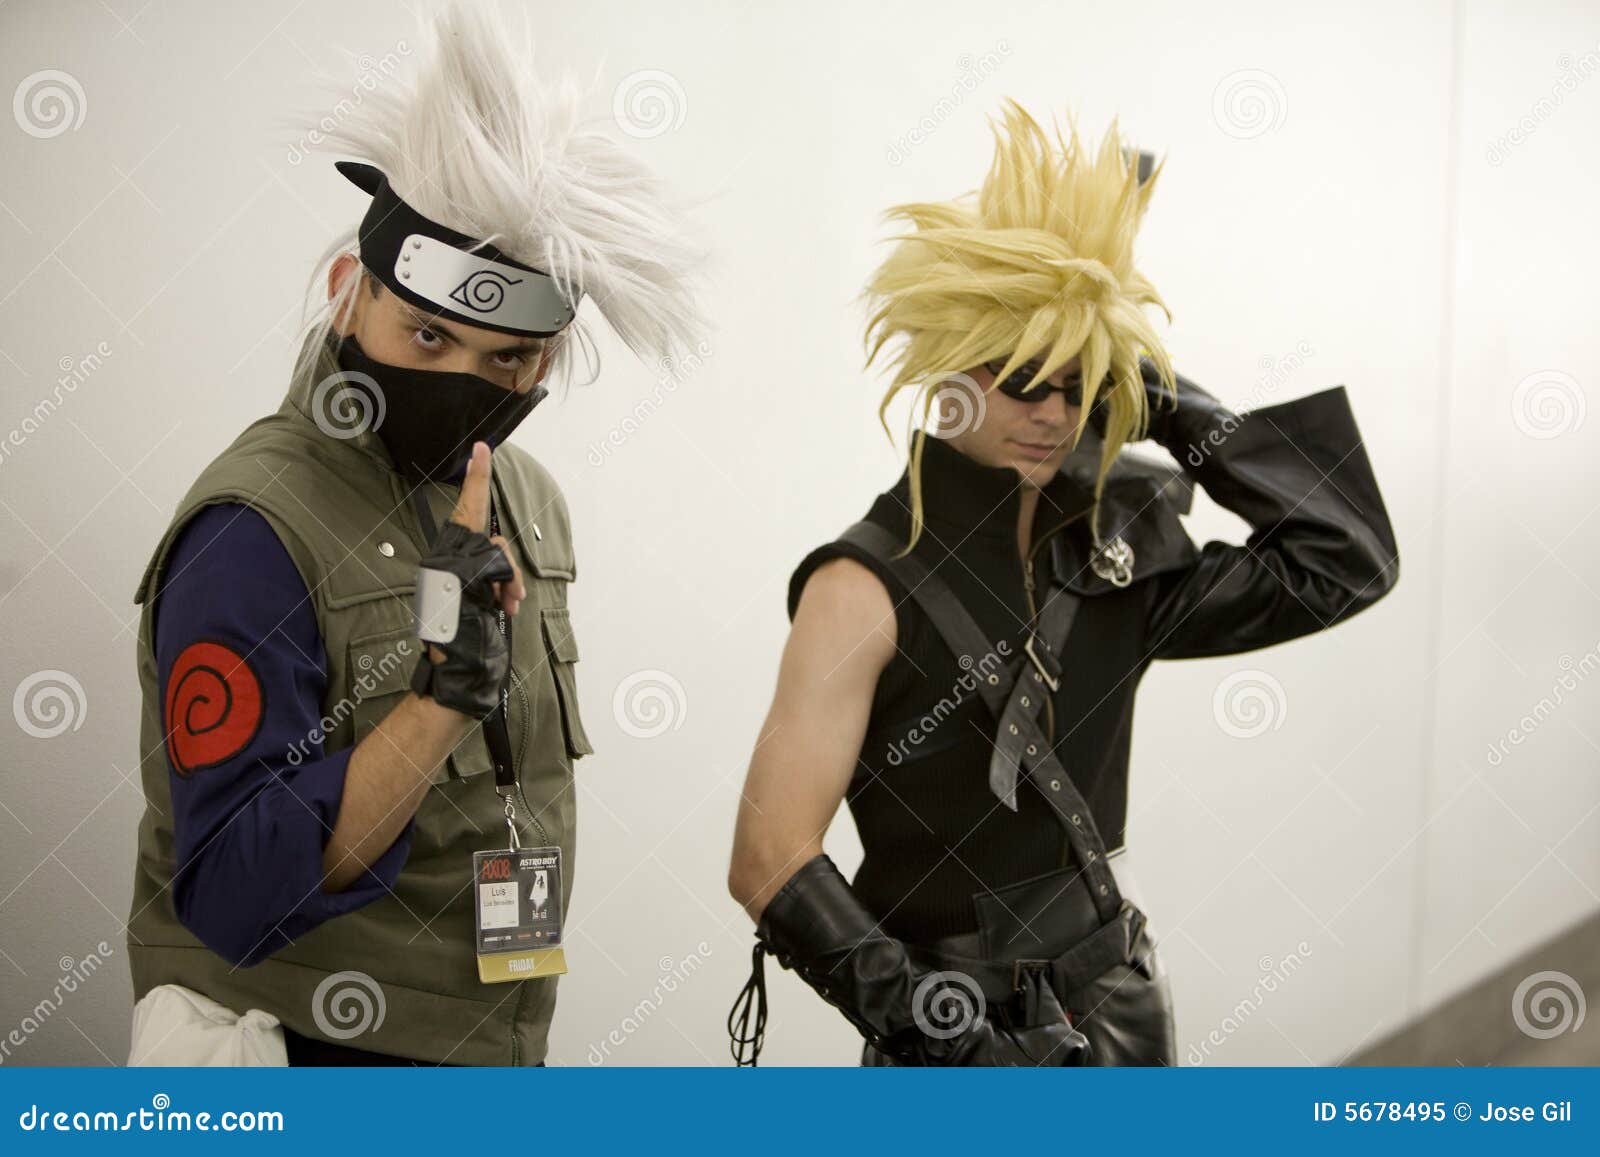 Anime Expo is more than just cosplay 8212 but theres a lot of cosplay  Los  Angeles Times